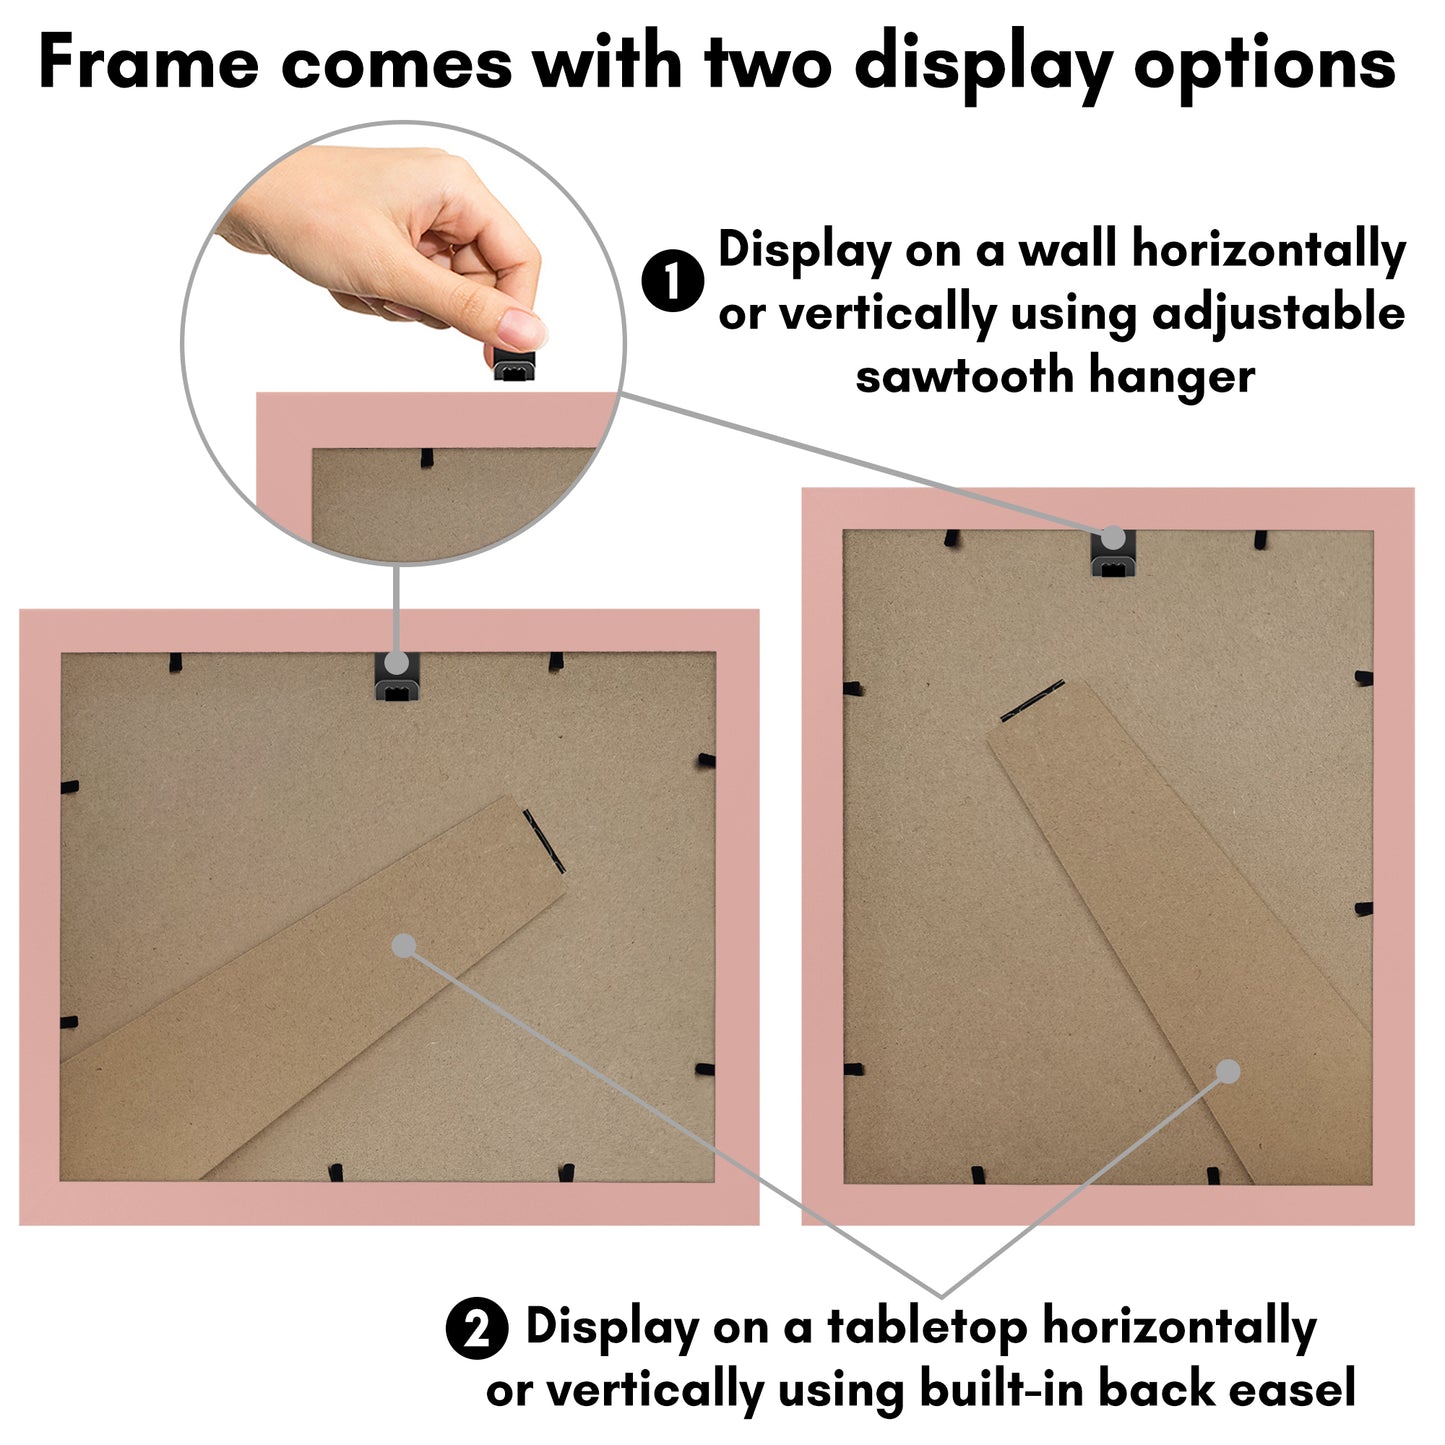 Picture Frame With Wavy Mat - Engineered Wood Photo Frame with Shatter-Resistant Glass Cover